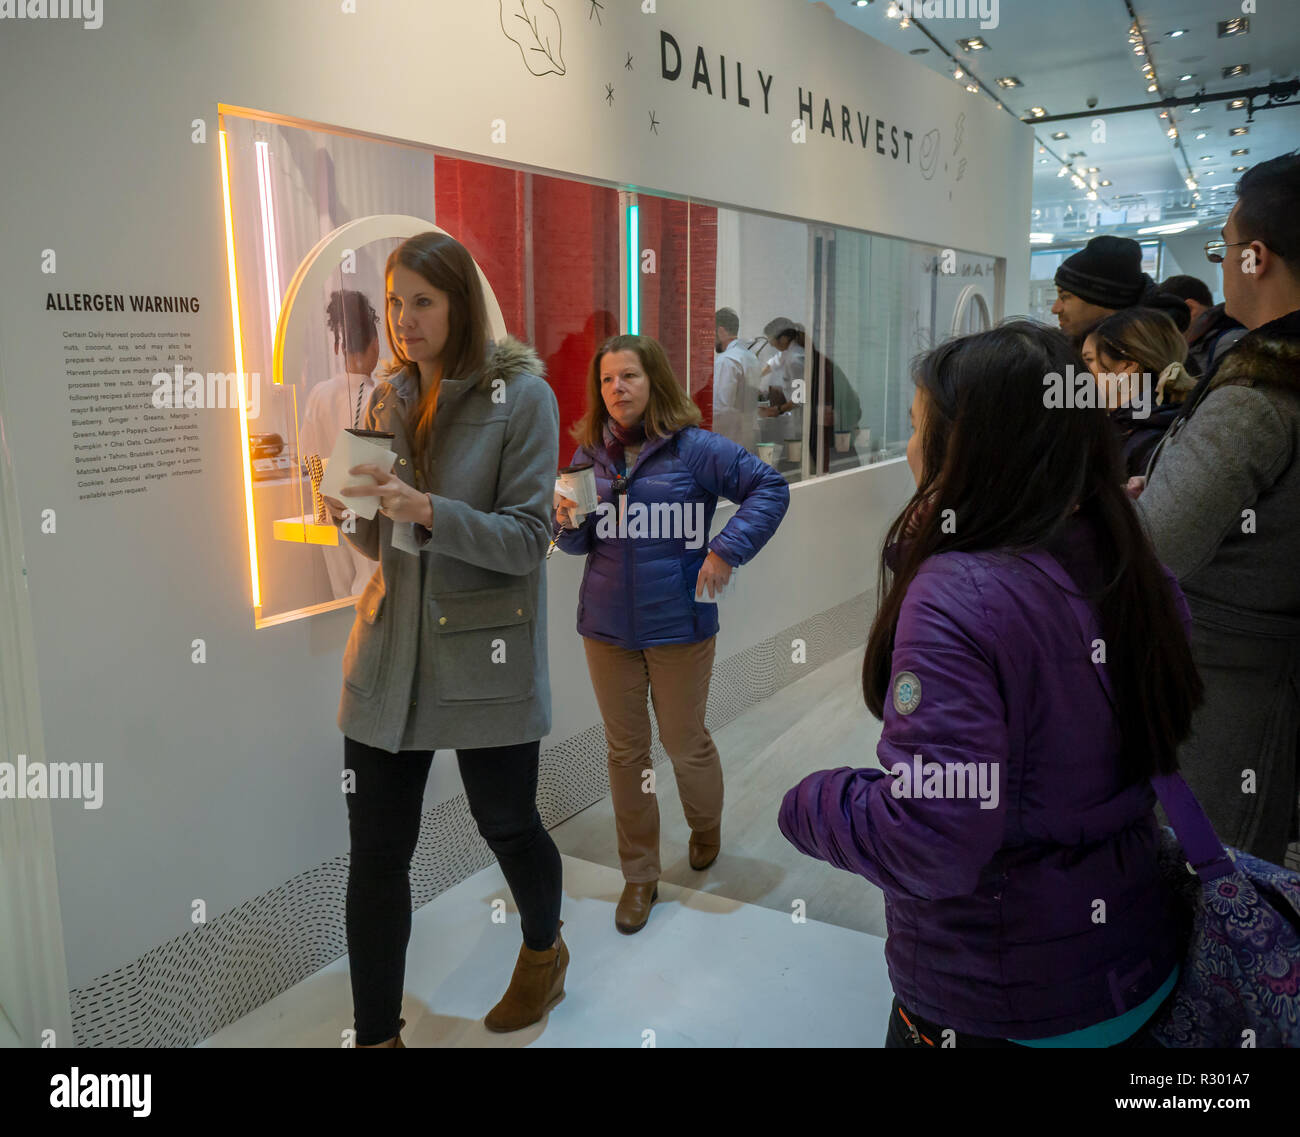 Visitors enjoy smoothies, soups and harvest bowls at the Daily Harvest subscription meal start-up 'Refueling Station' pop-up store in New York on opening day, Wednesday, November 14, 2018. The company sells pre-portioned cups, which you choose on a weekly or monthly commitment, that arrive frozen which you can heat, soak, or blend.  (© Richard B. Levine) Stock Photo